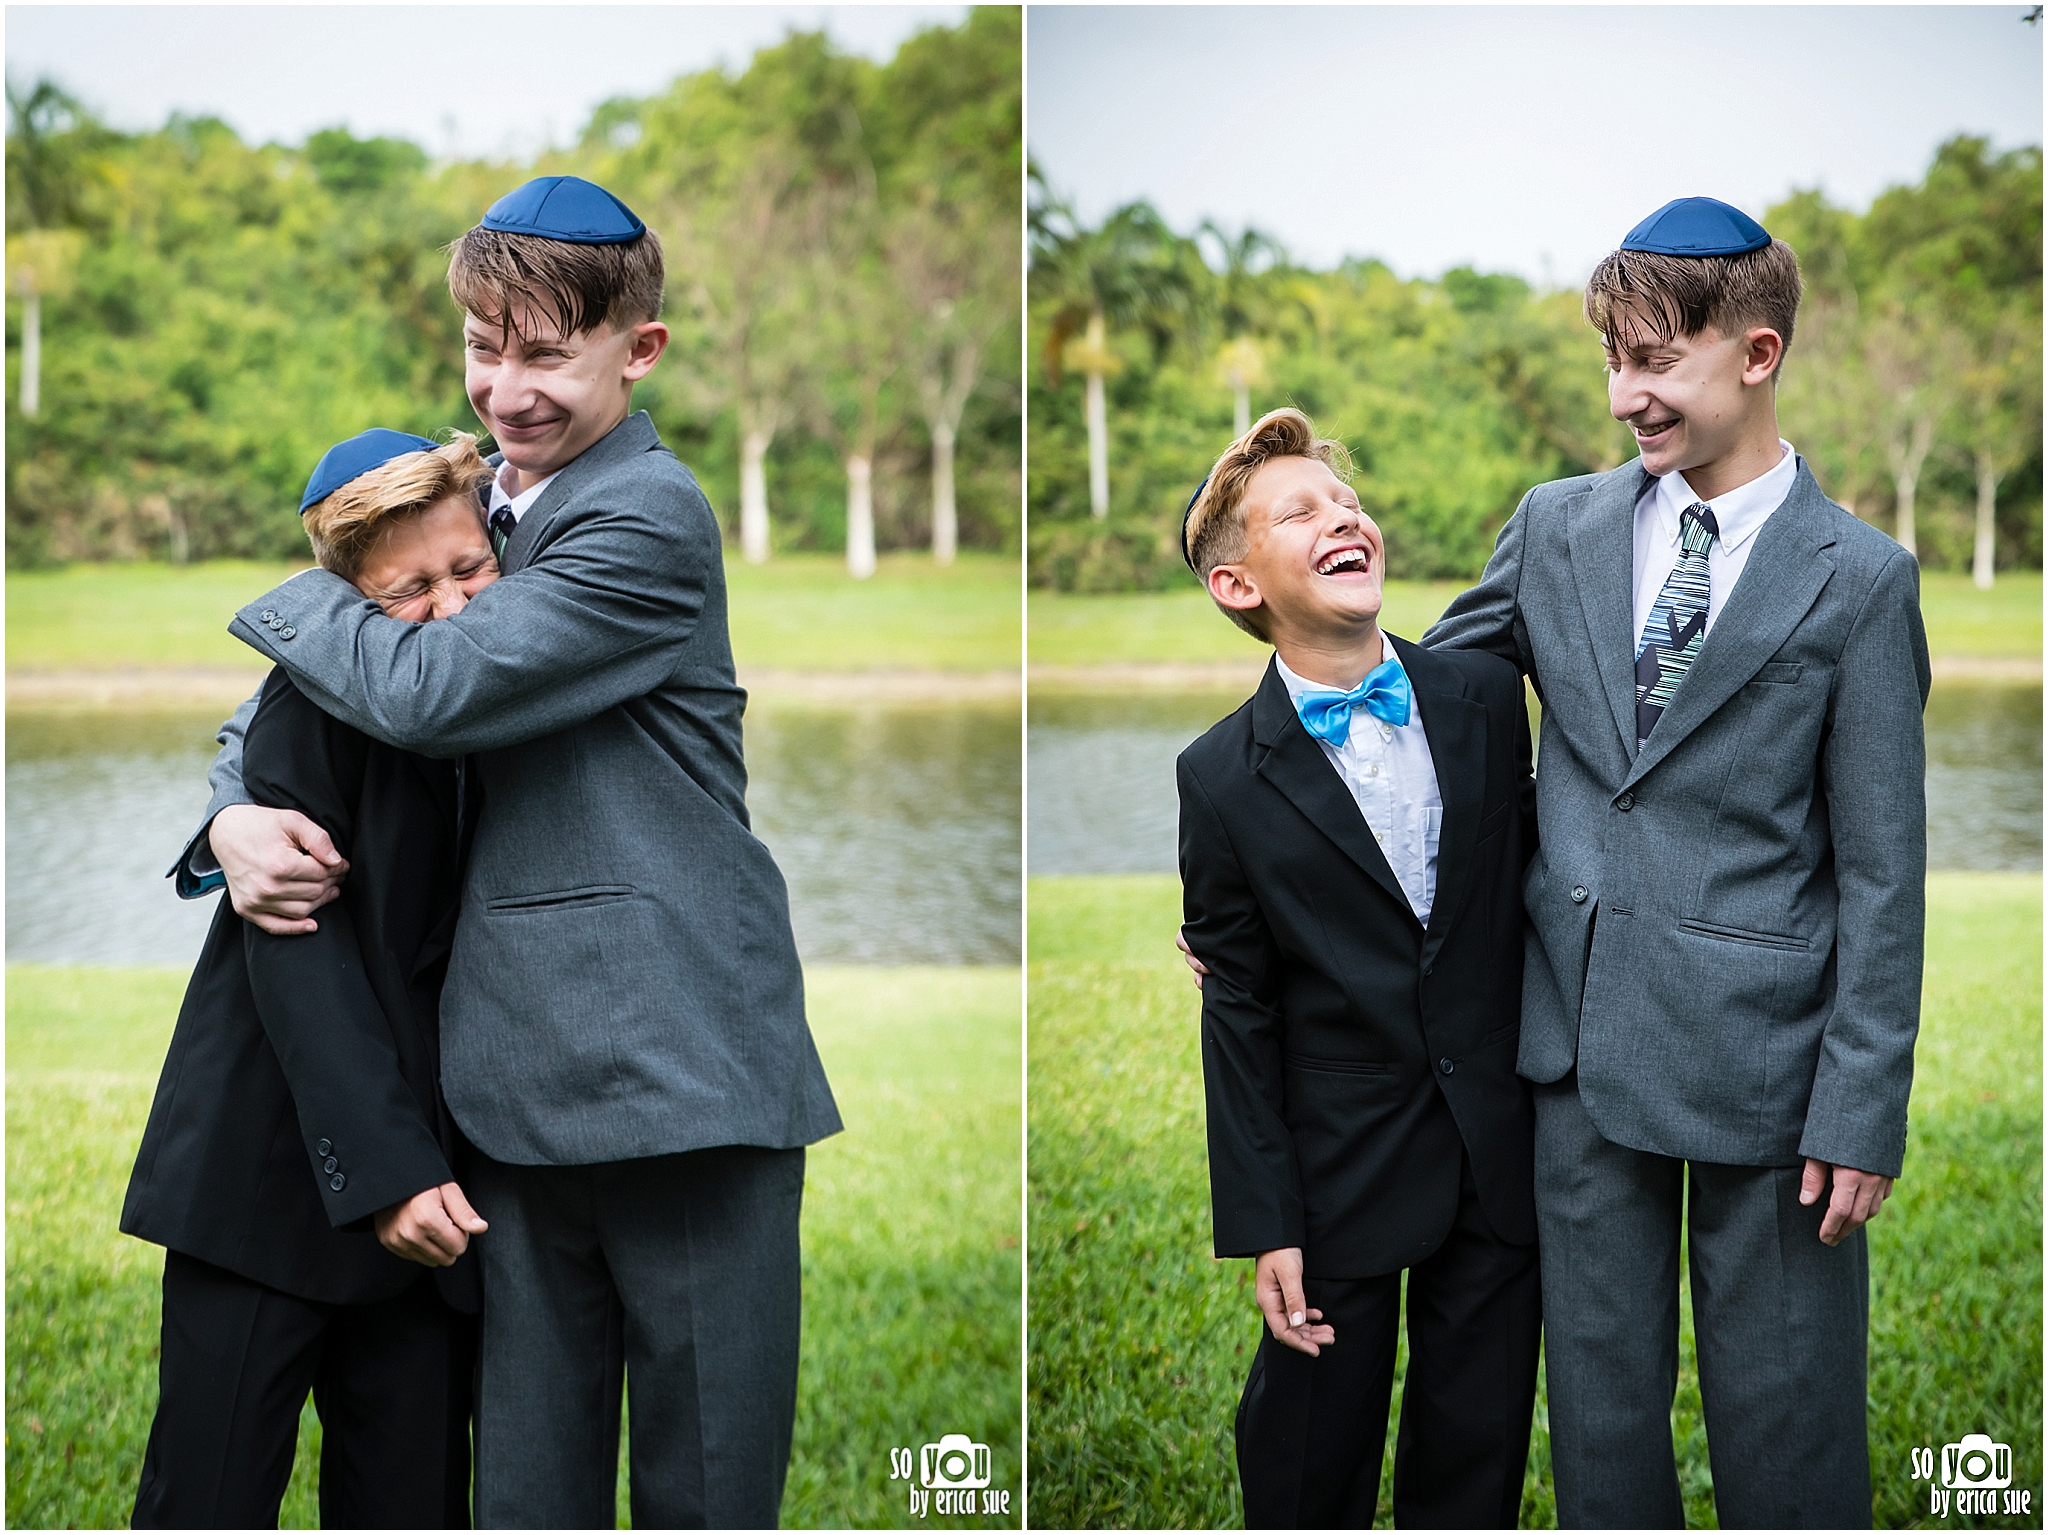 bar-mitzvah-photography-ft-lauderdale-so-you-by-erica-sue-7550 (2).jpg